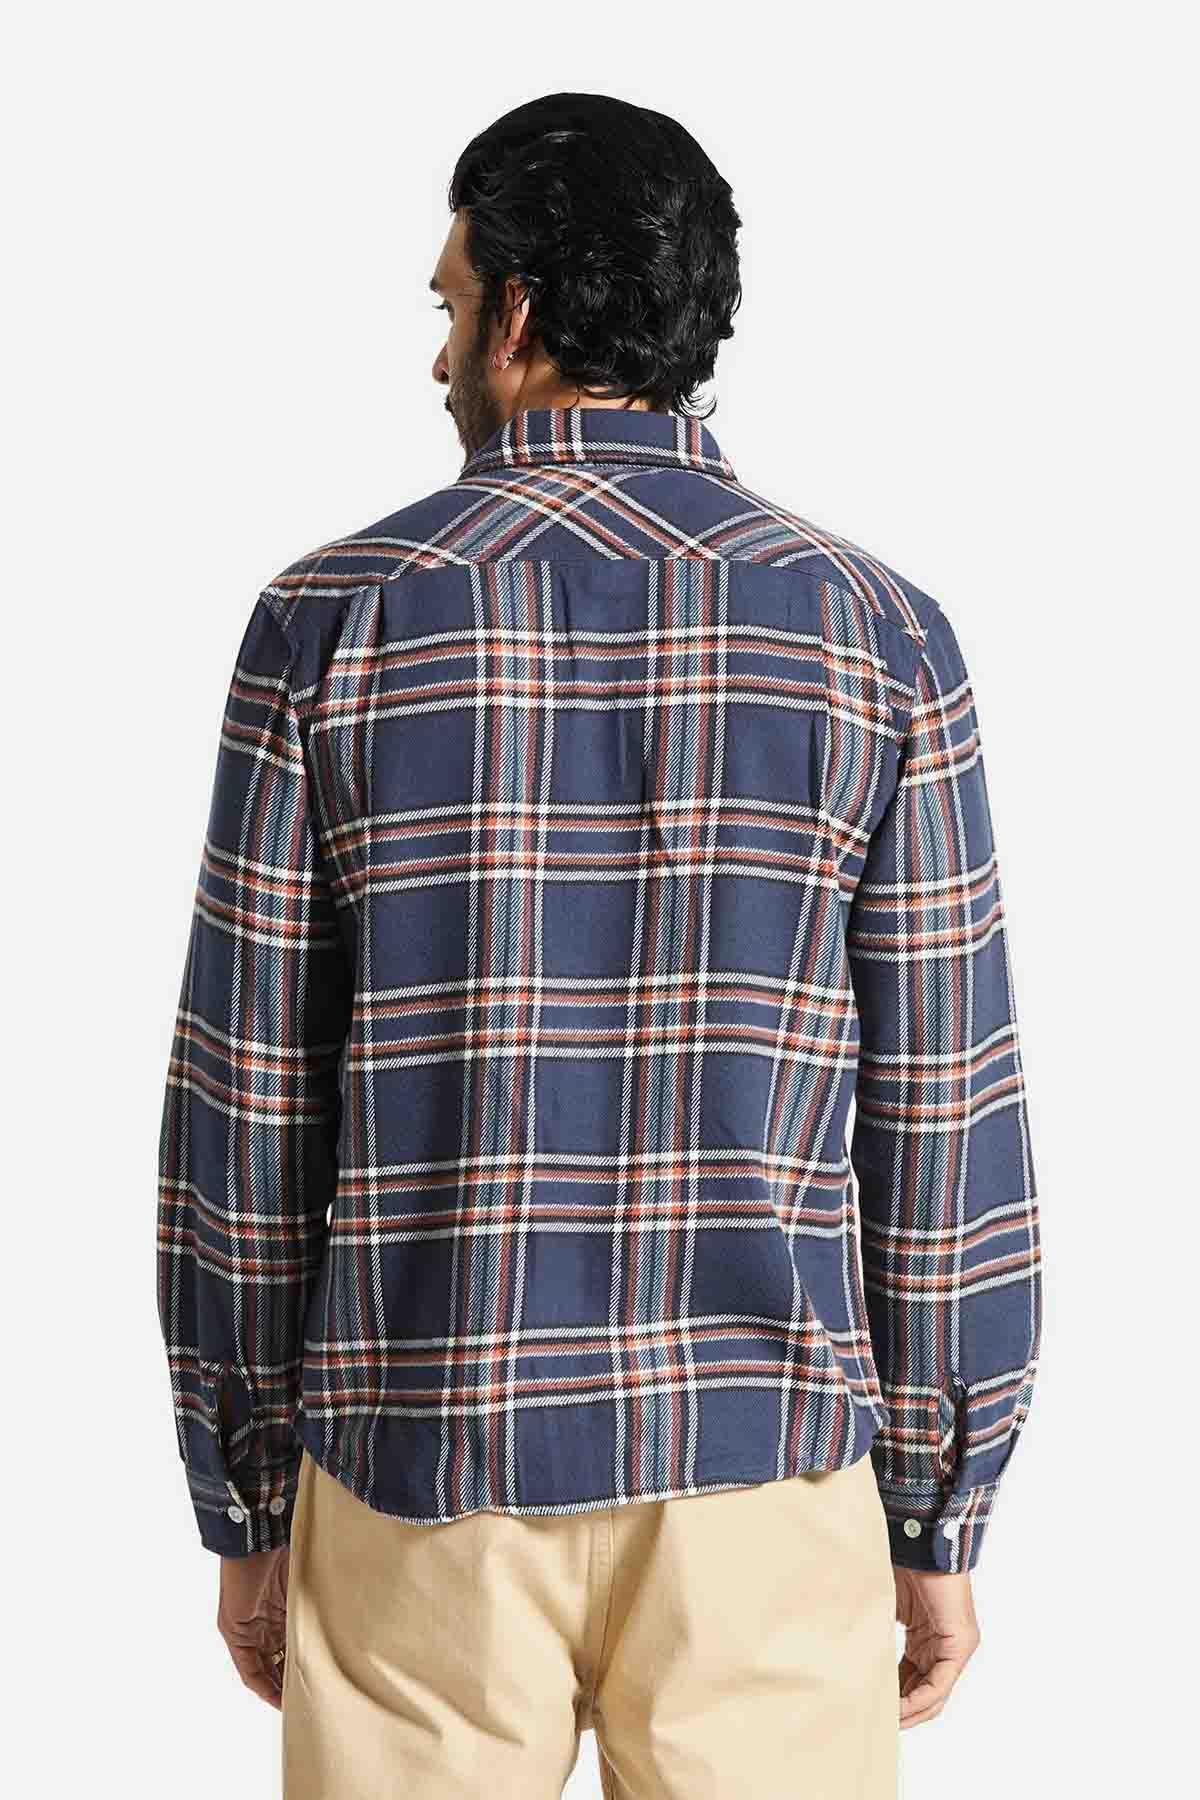 Brixton - Bowery LS Flannel - Washed Navy/Off White/Terracotta - Back